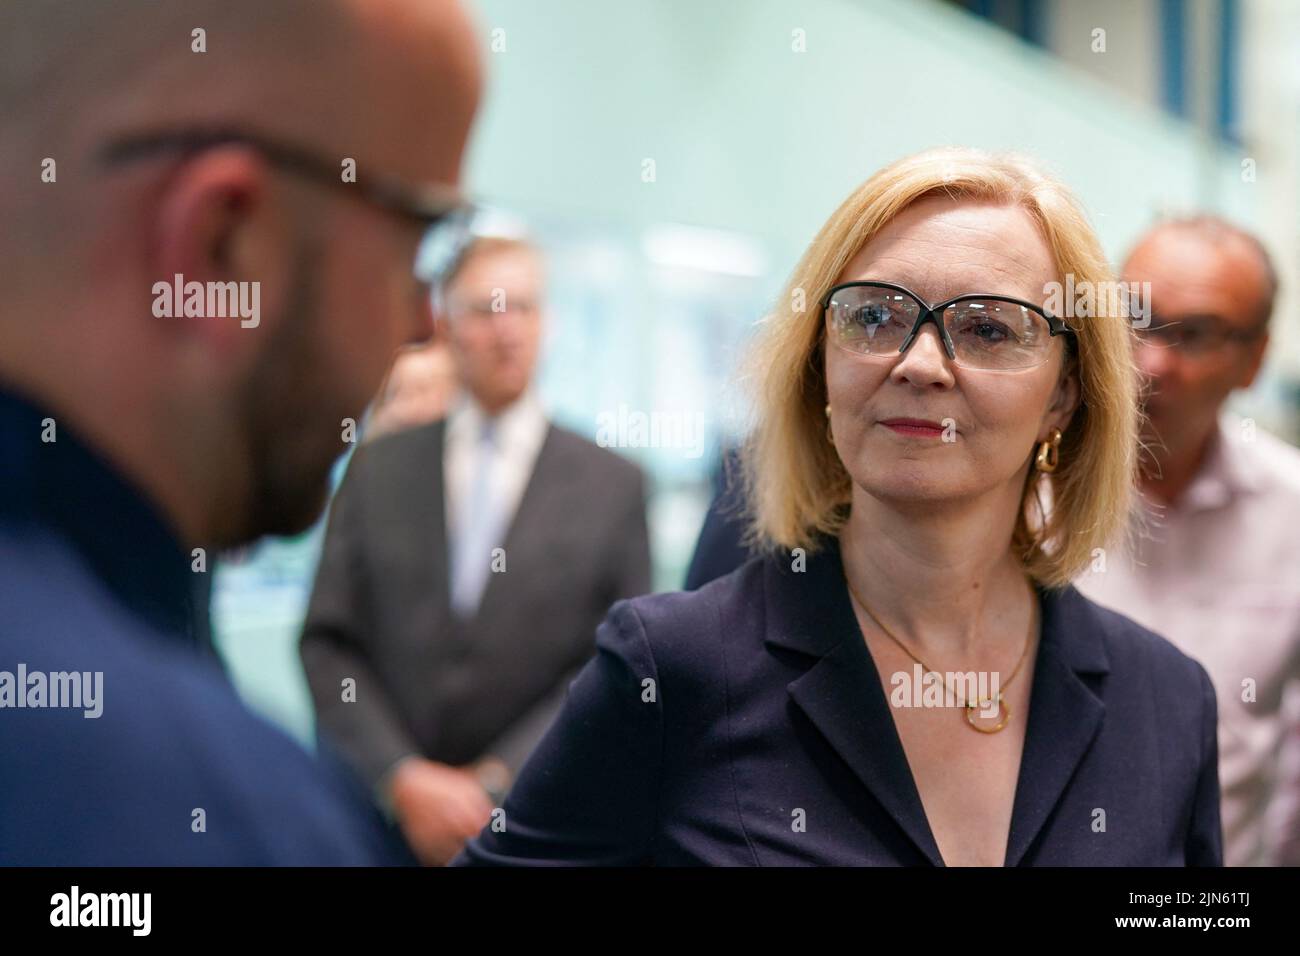 Britain's Conservative Party leadership candidate Liz Truss visits the Reliance Precision engineering company ahead of a hustings event later, in Huddersfield, Britain August 9, 2022. Ian Forsyth/Pool via REUTERS Stock Photo